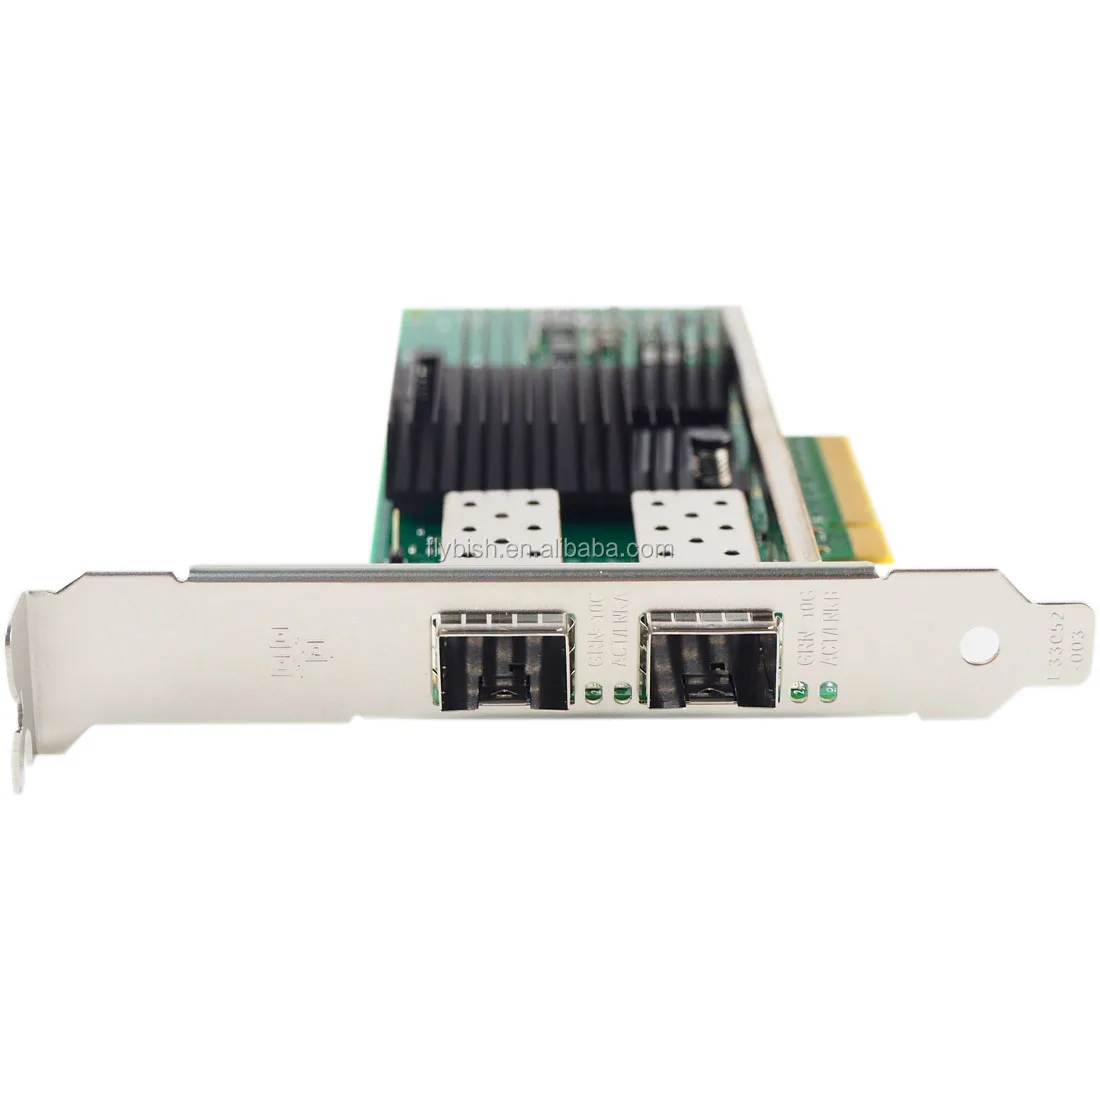 Intel Ethernet Converged Network Adapters X710 10g Dual Port Pci